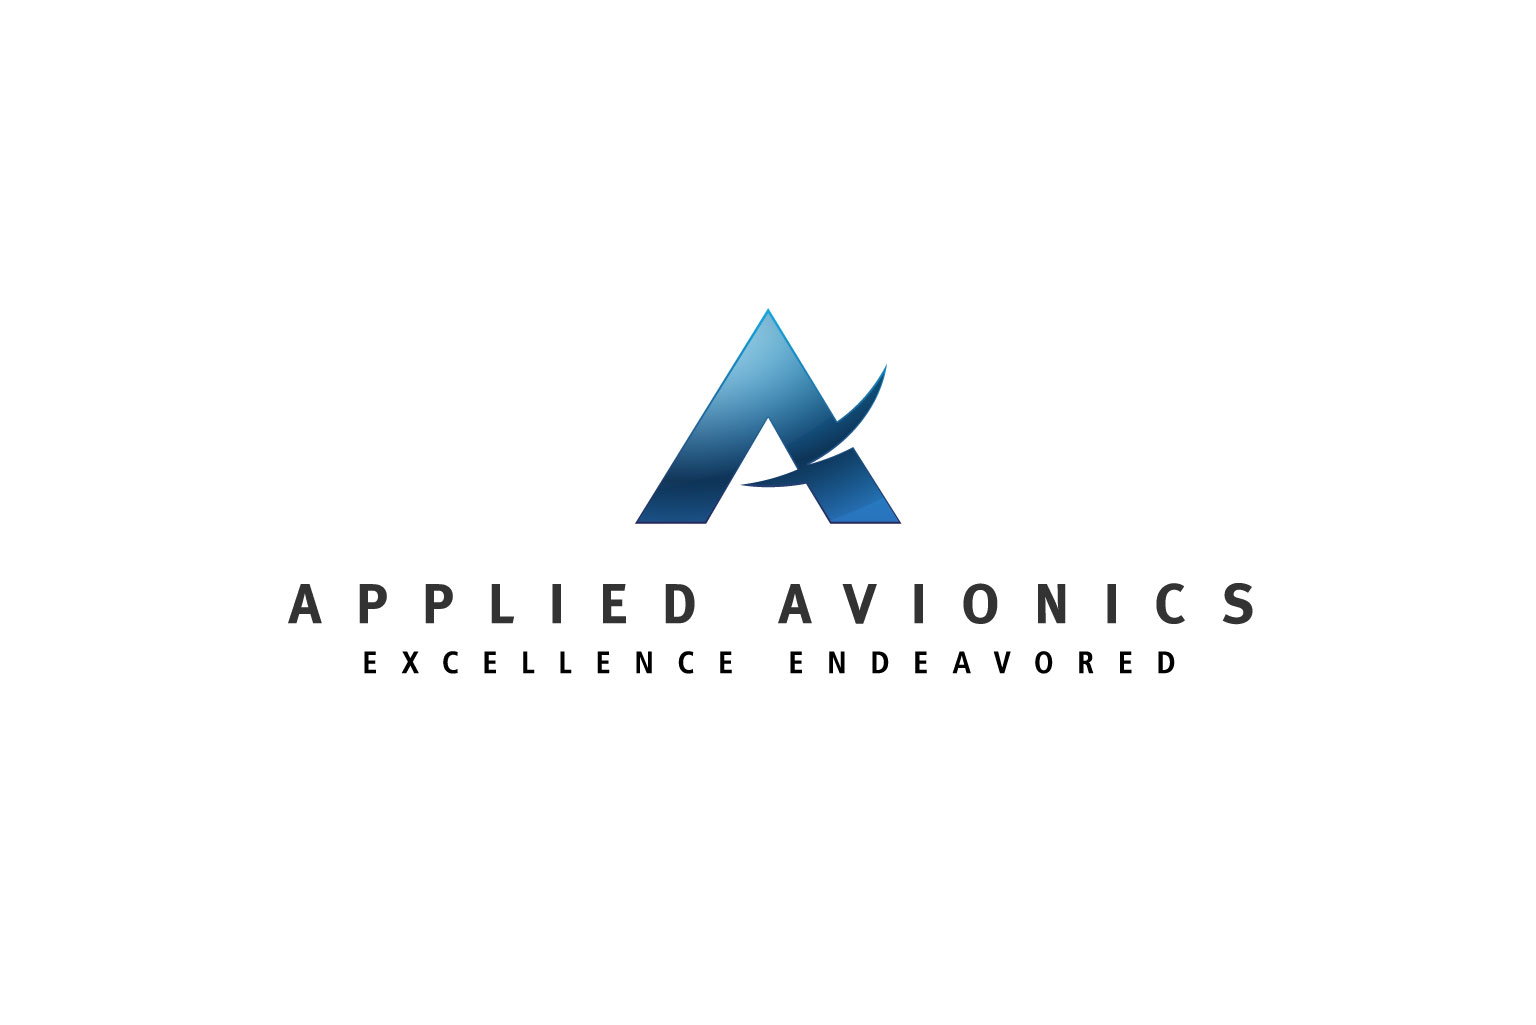 Applied Avionics is an airplane part supplier company. The client’s request was to create a brand identity that reflects the high-tech and industry knowledge.